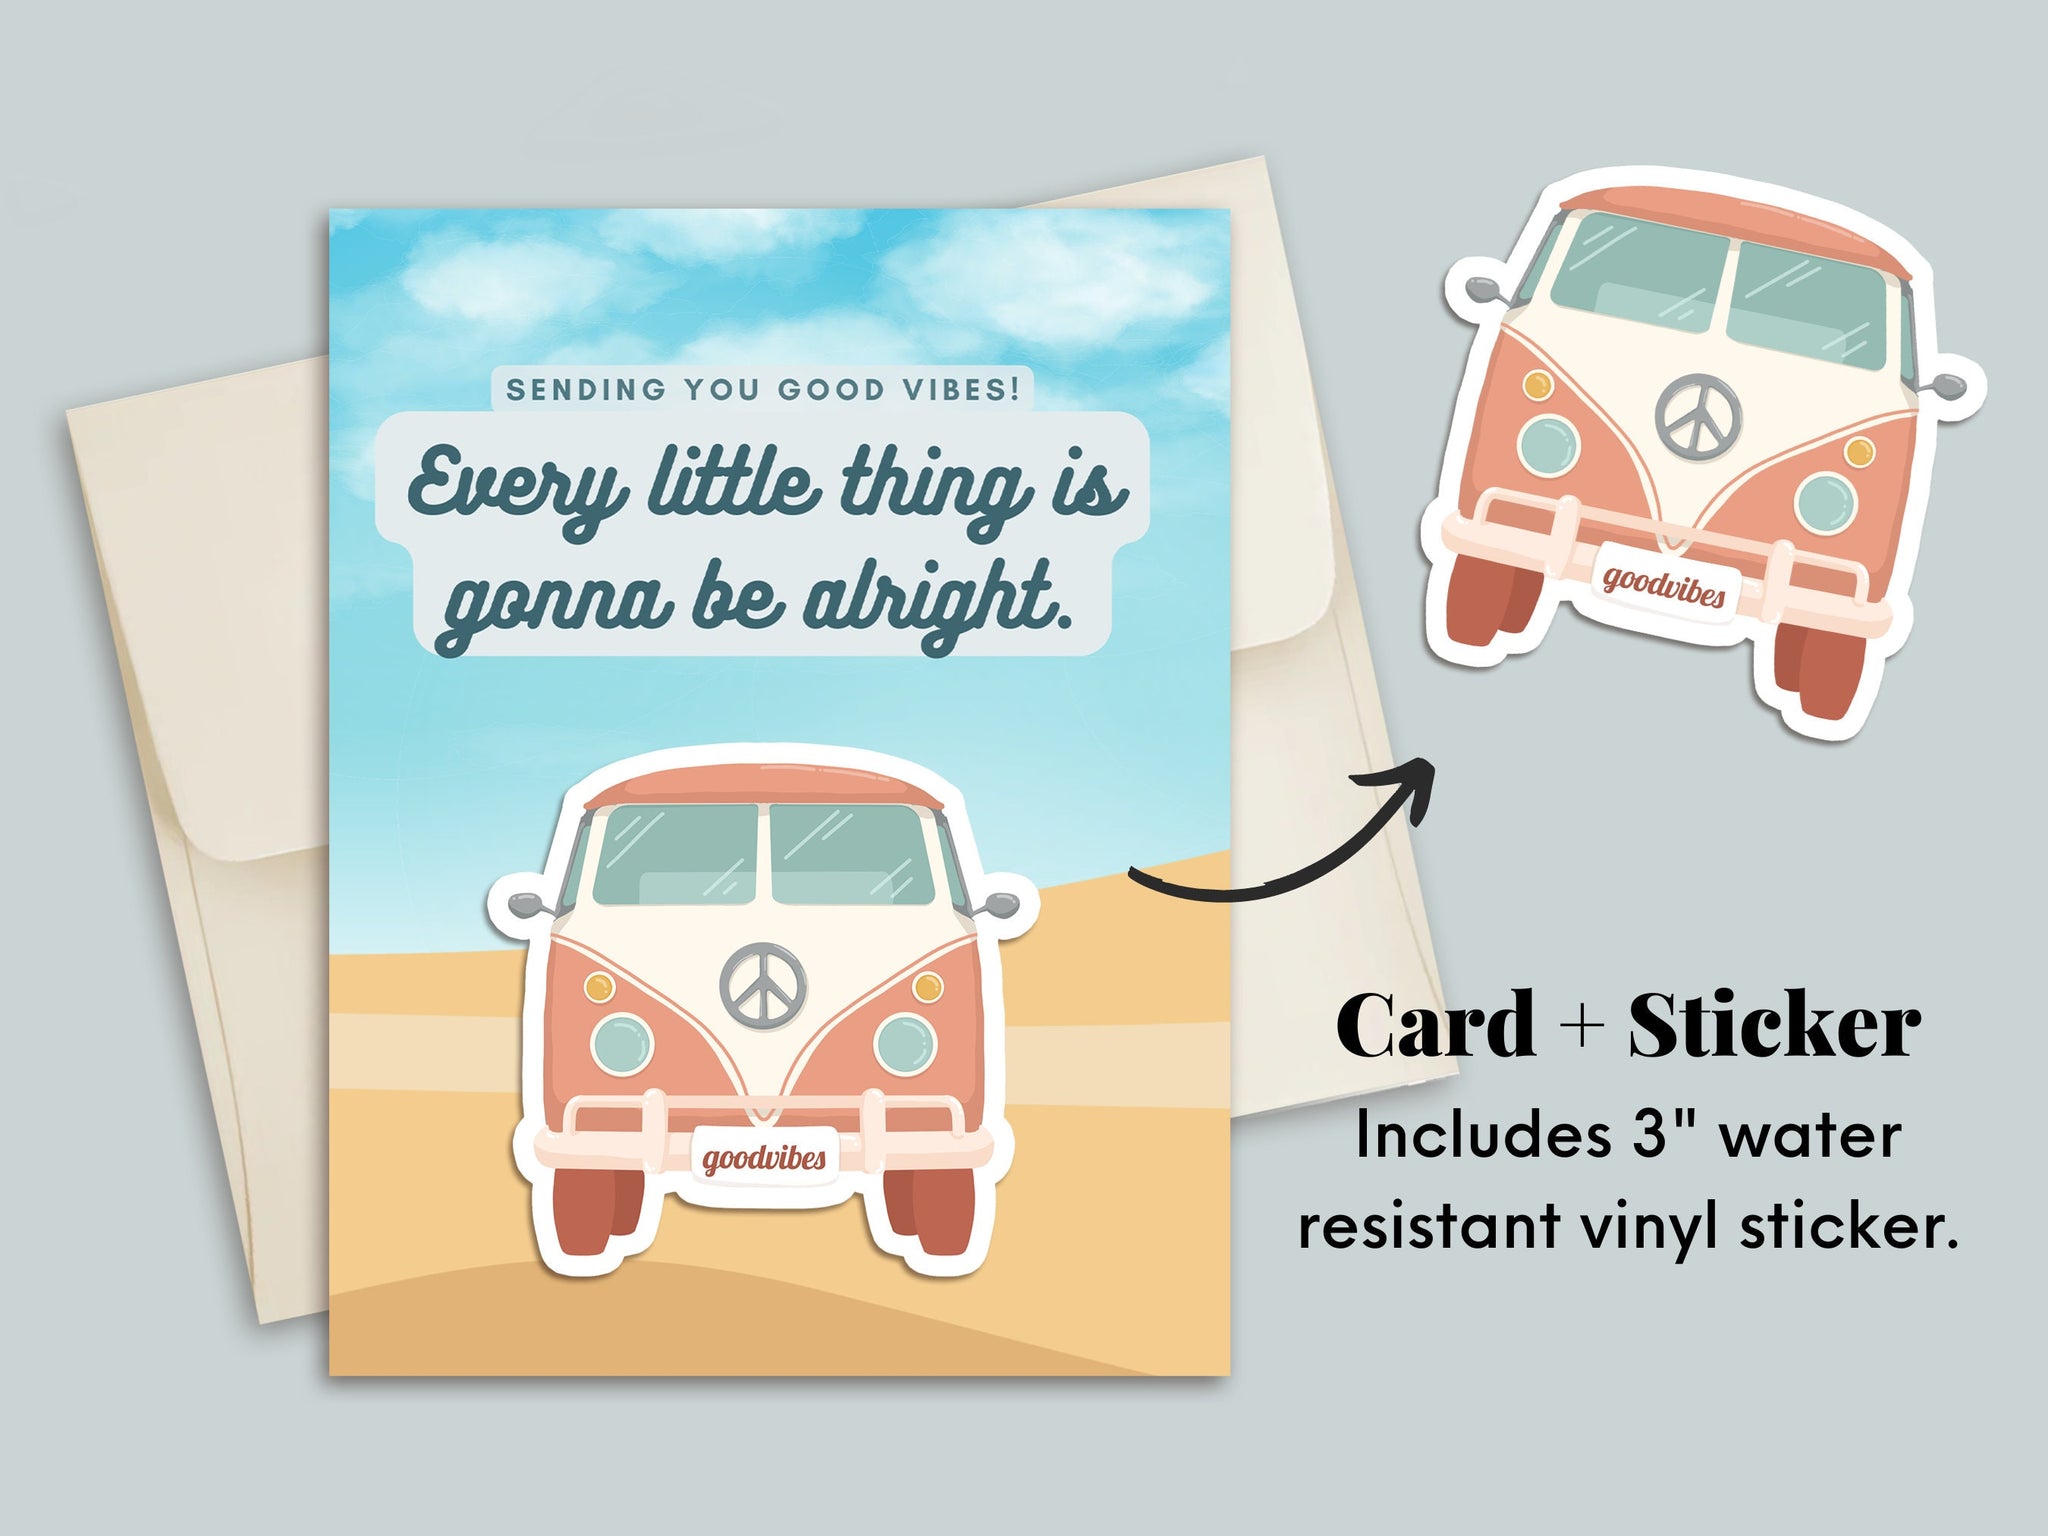 NEW! Every Little Thing is Gonna Be Alright Greeting Card | Sending You Good Vibes Sticker | Encouragement Gifts | Positive Cards